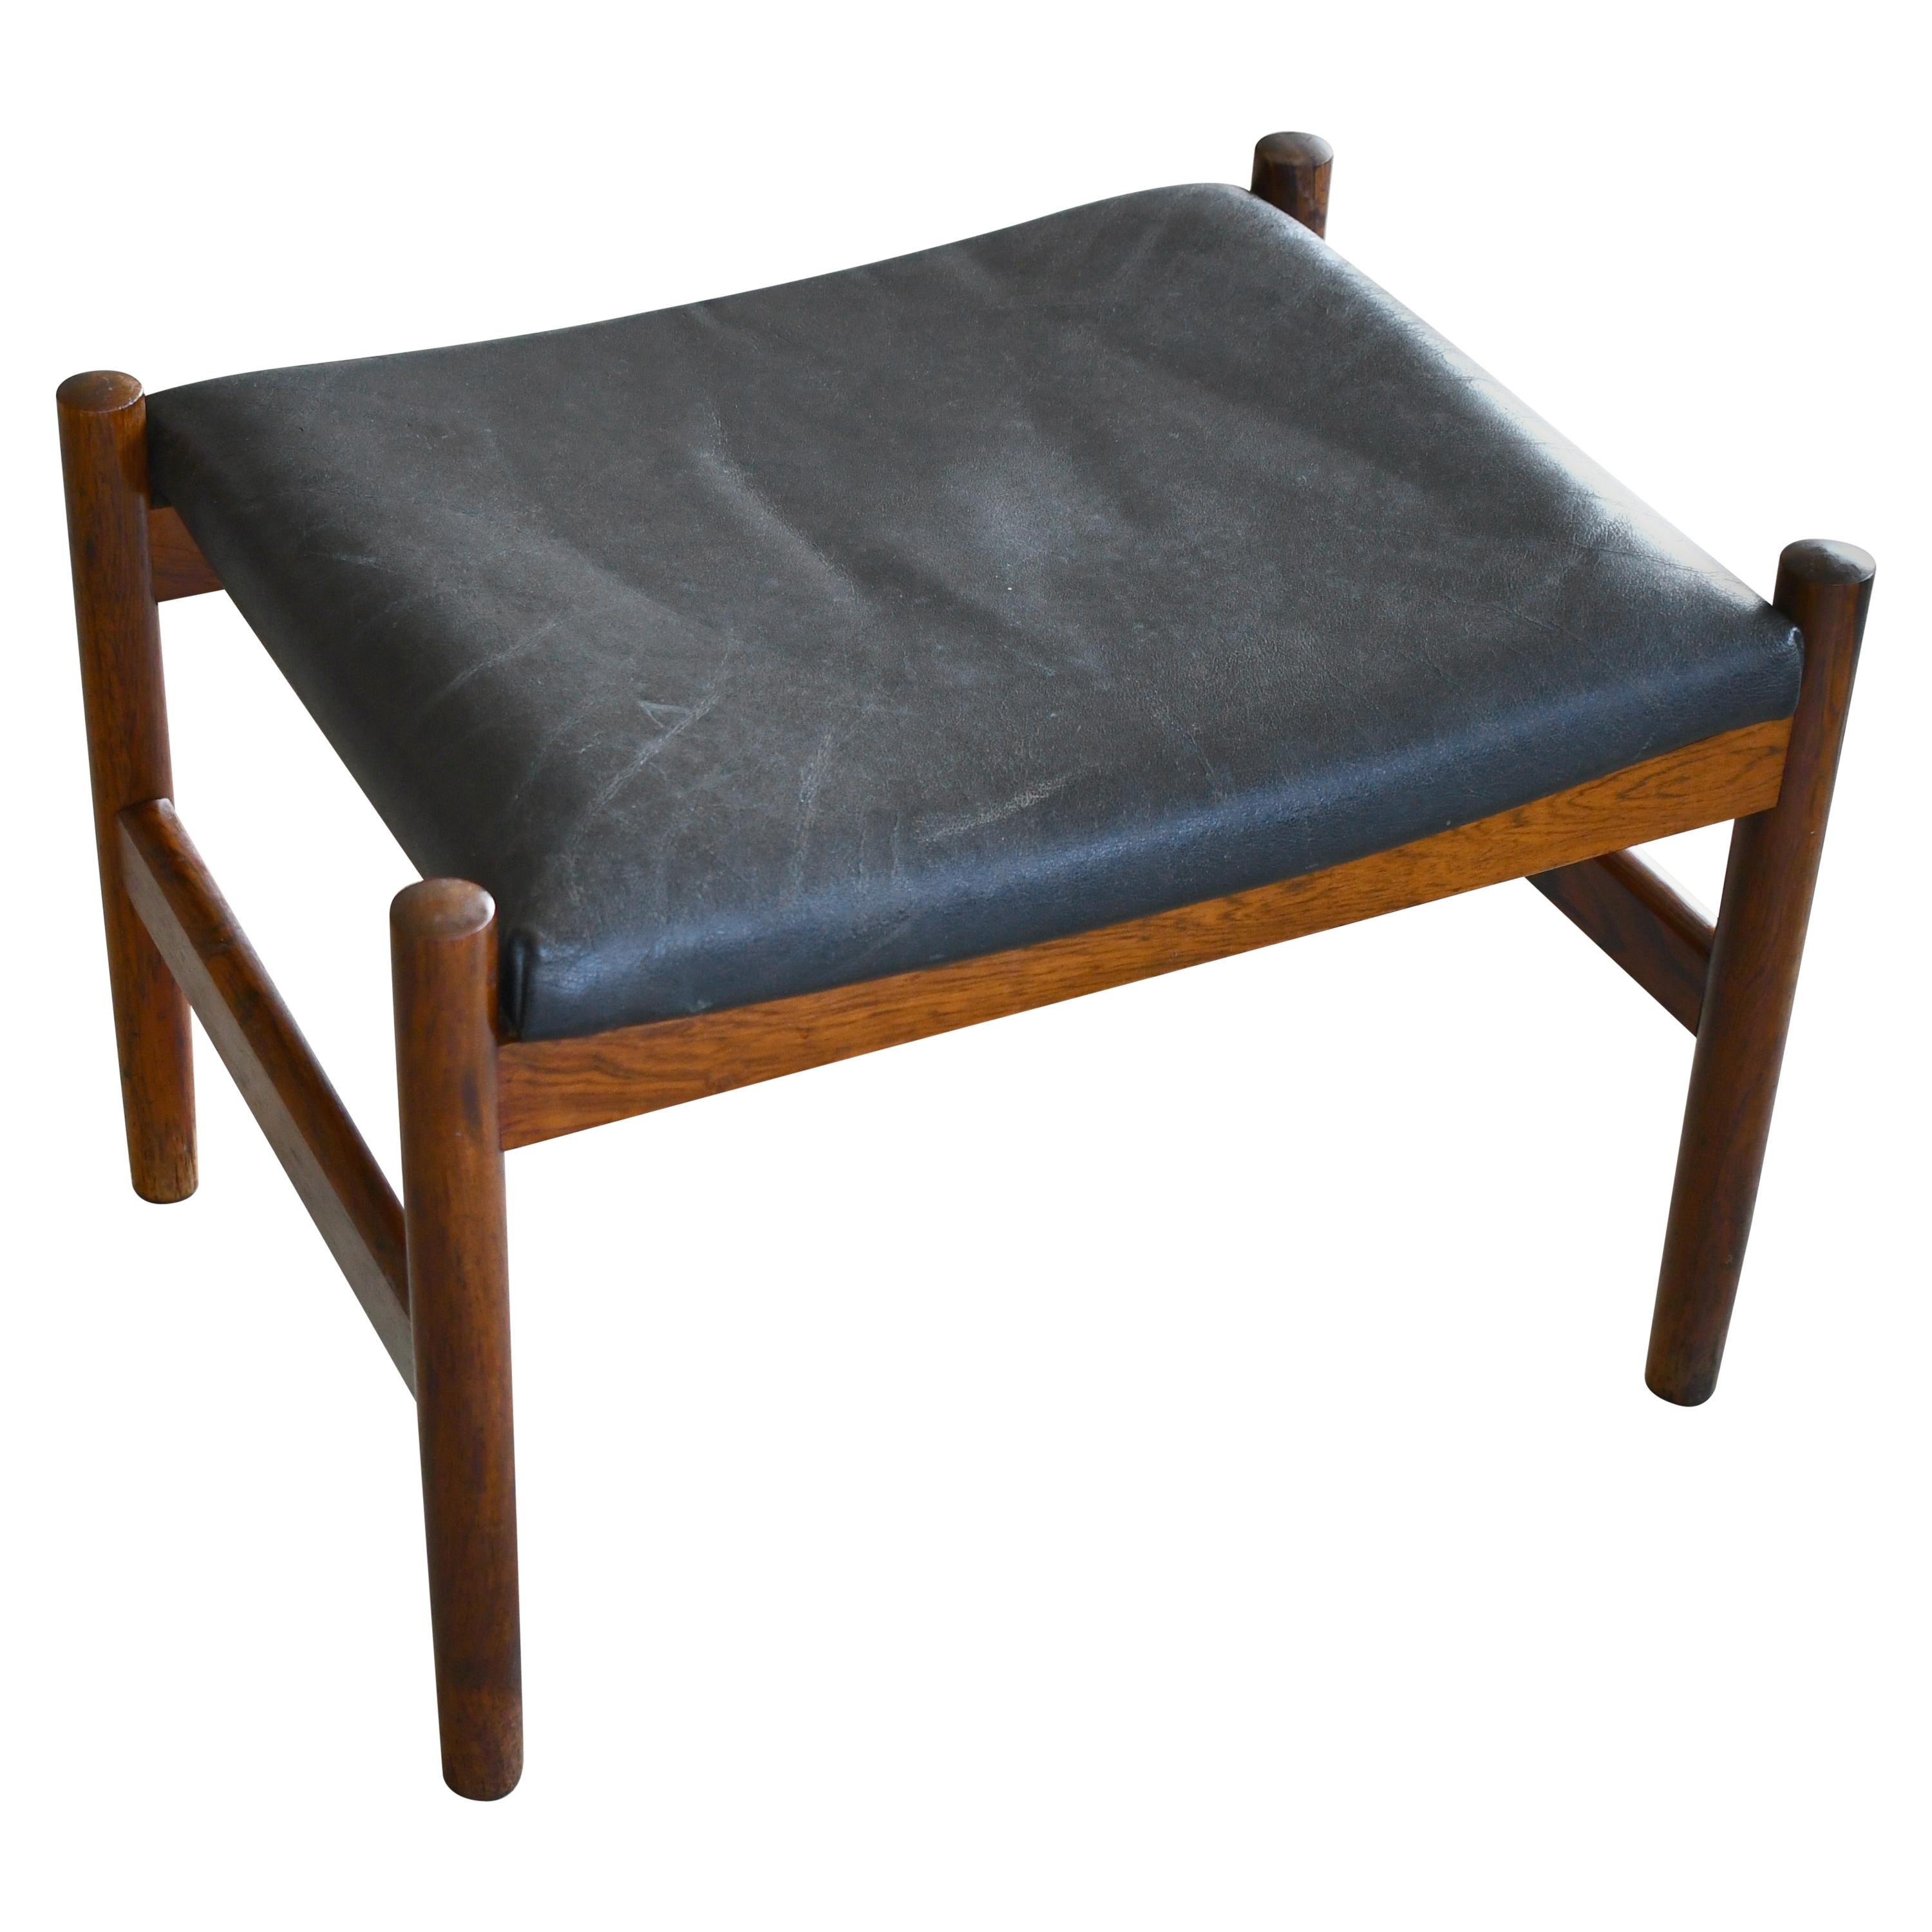 Danish 1950s Rosewood and Leather Ottoman or Footstool by Spøttrup Møbelfabrik